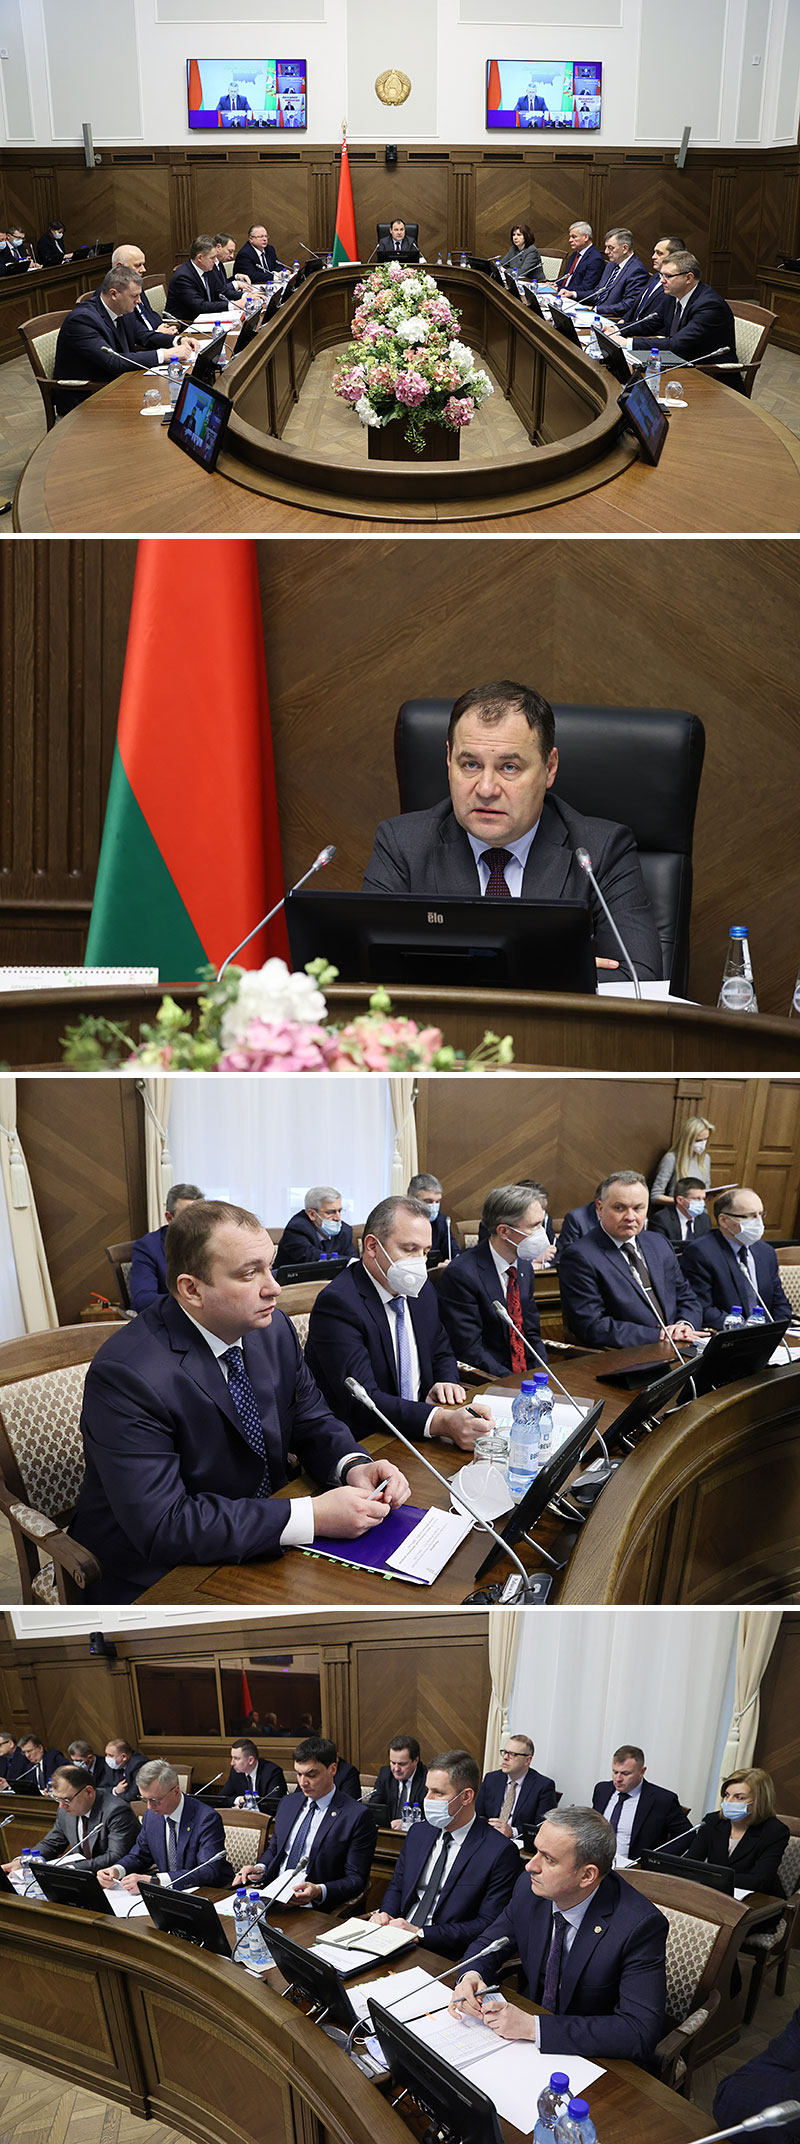 Meeting of the Presidium of the Council of Ministers of the Republic of Belarus